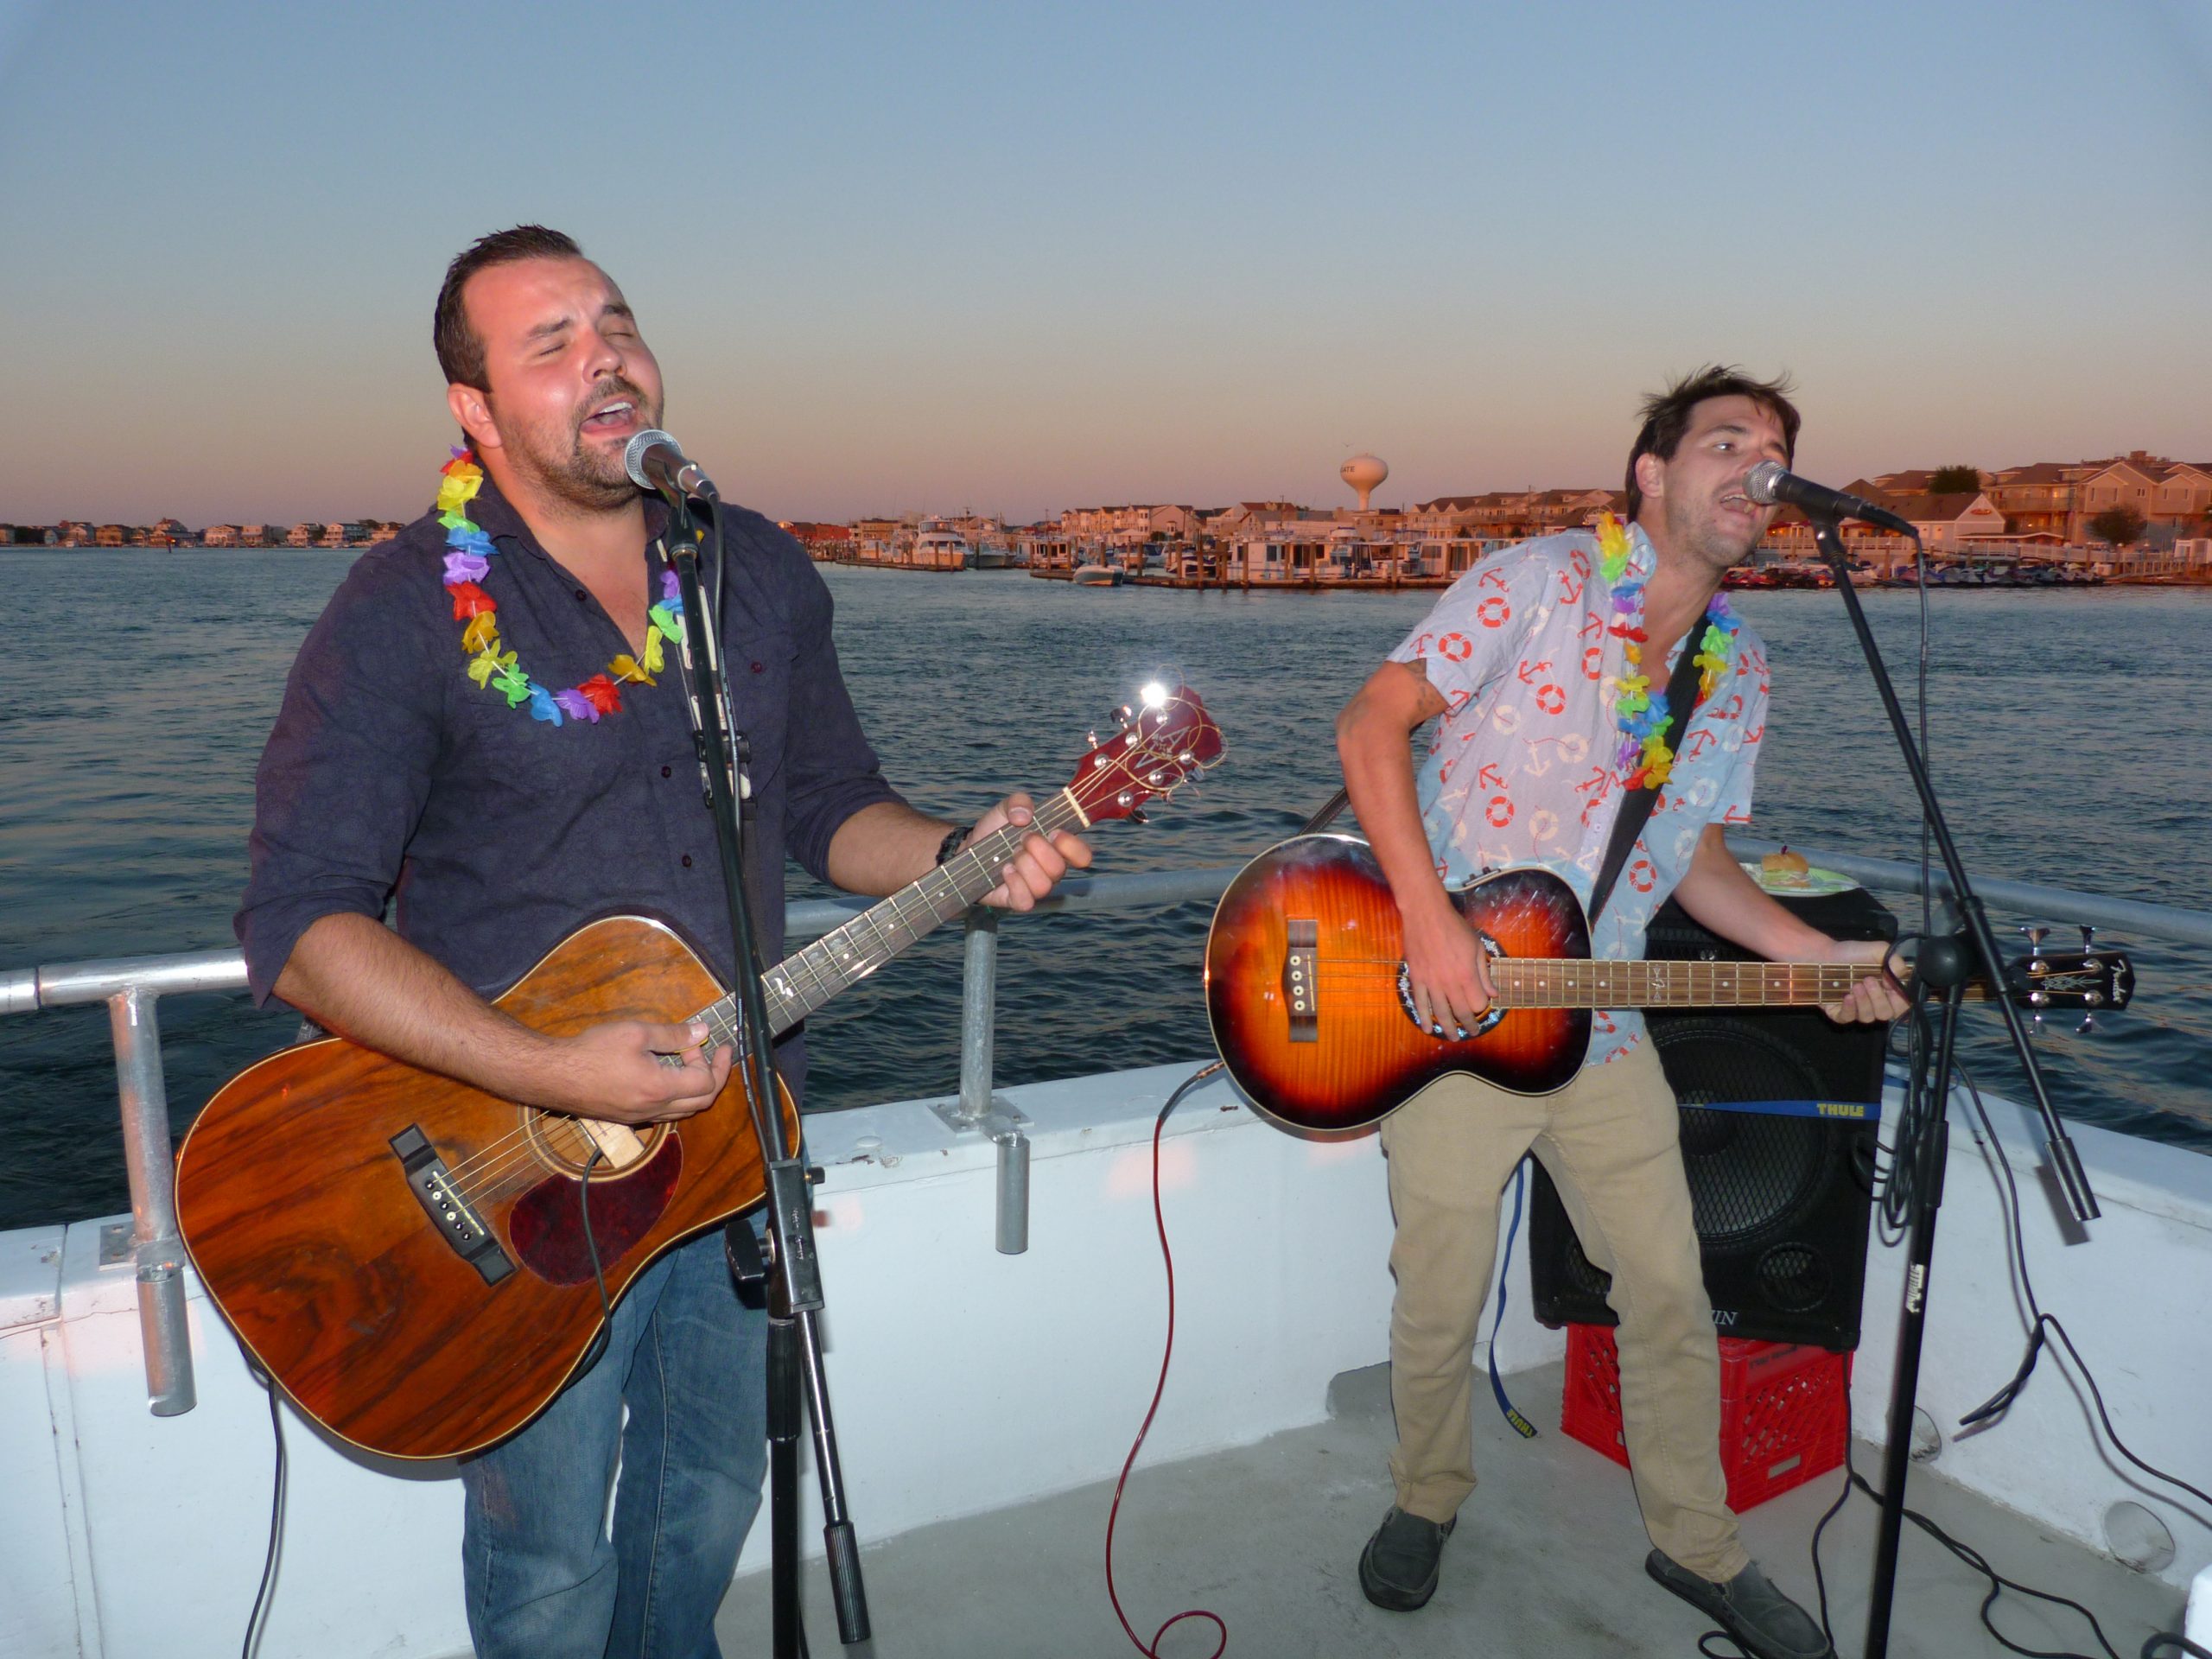 Steve Mullary of Deptford, N.J. and bassist Mike Barnes of Philadelphia by way of Ocean City perform during the Faces 4 Autism benefit cruise Sept. 6, 2013 in Margate. (Photo Shaun Smith)